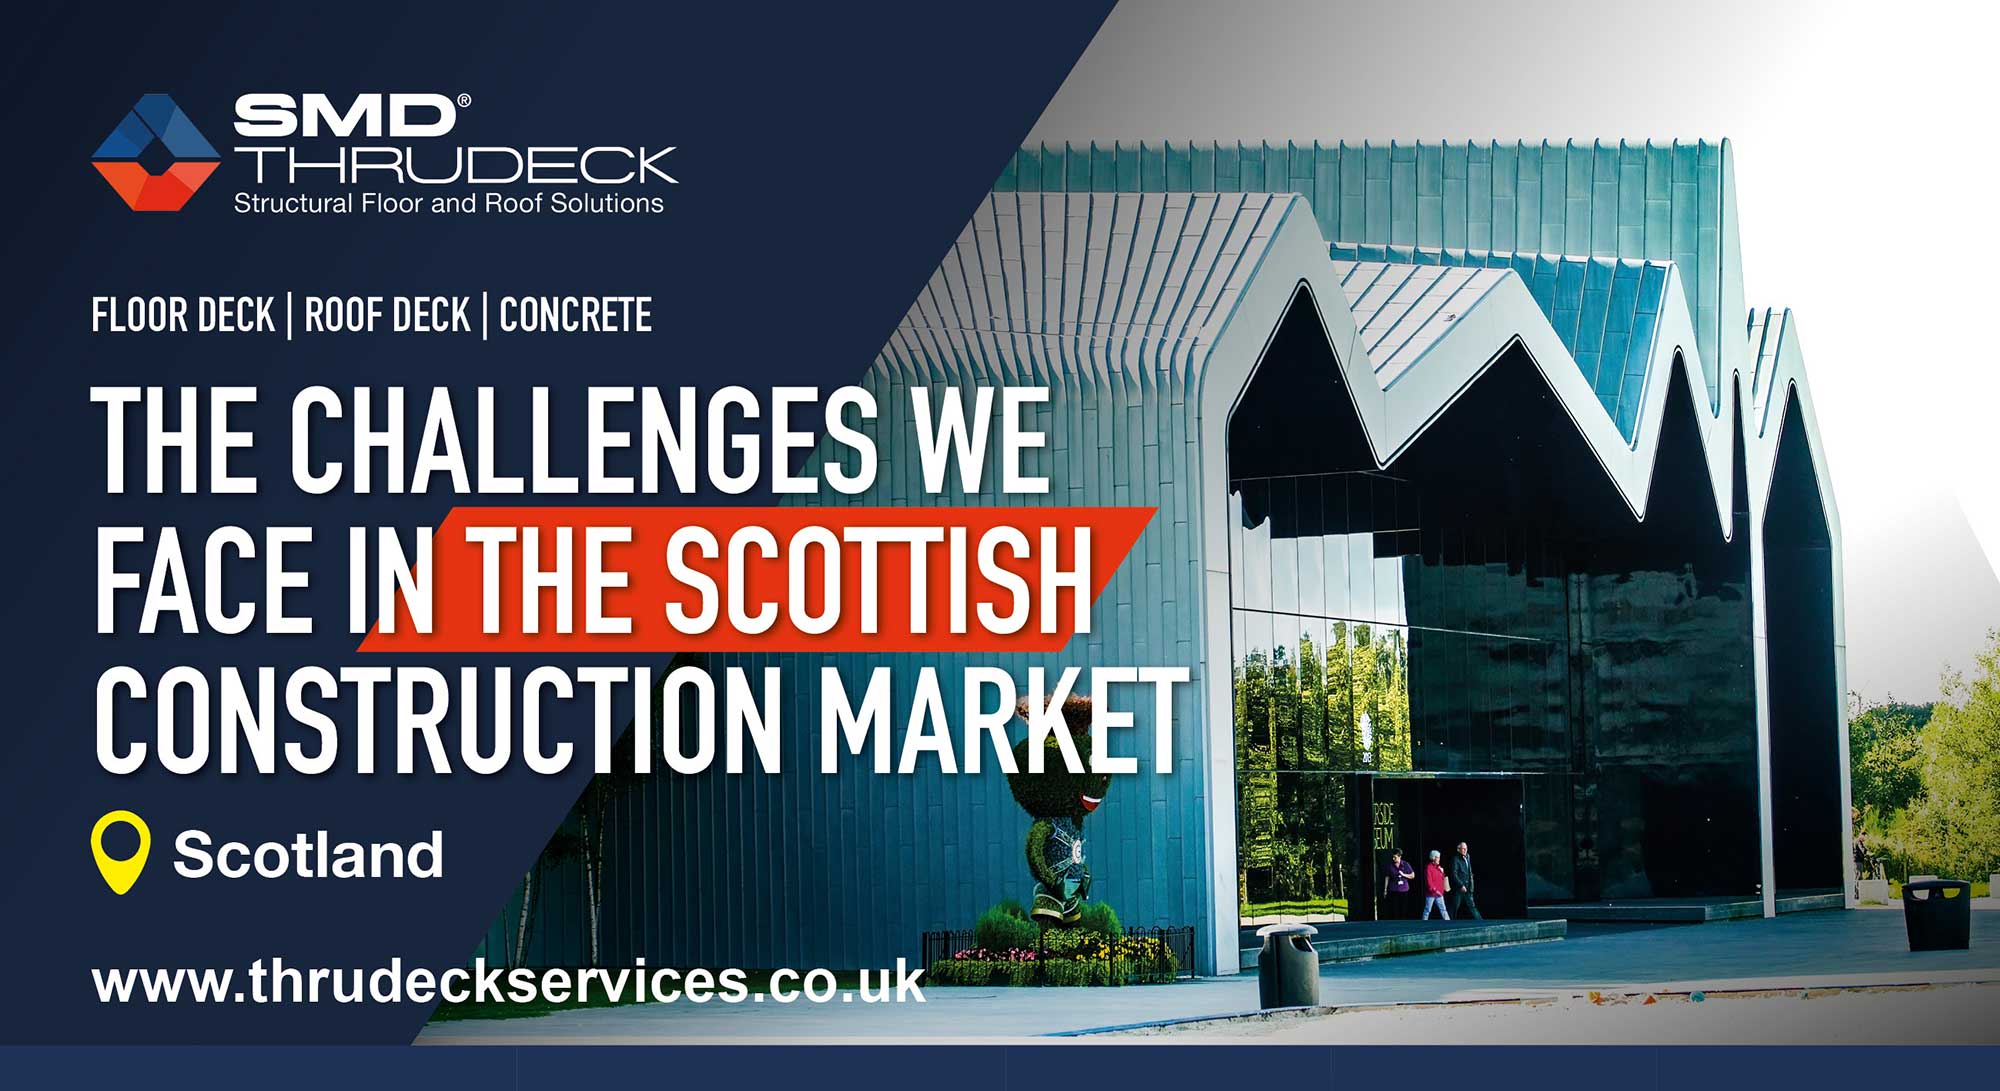 The challenges we face in the Scottish construction market